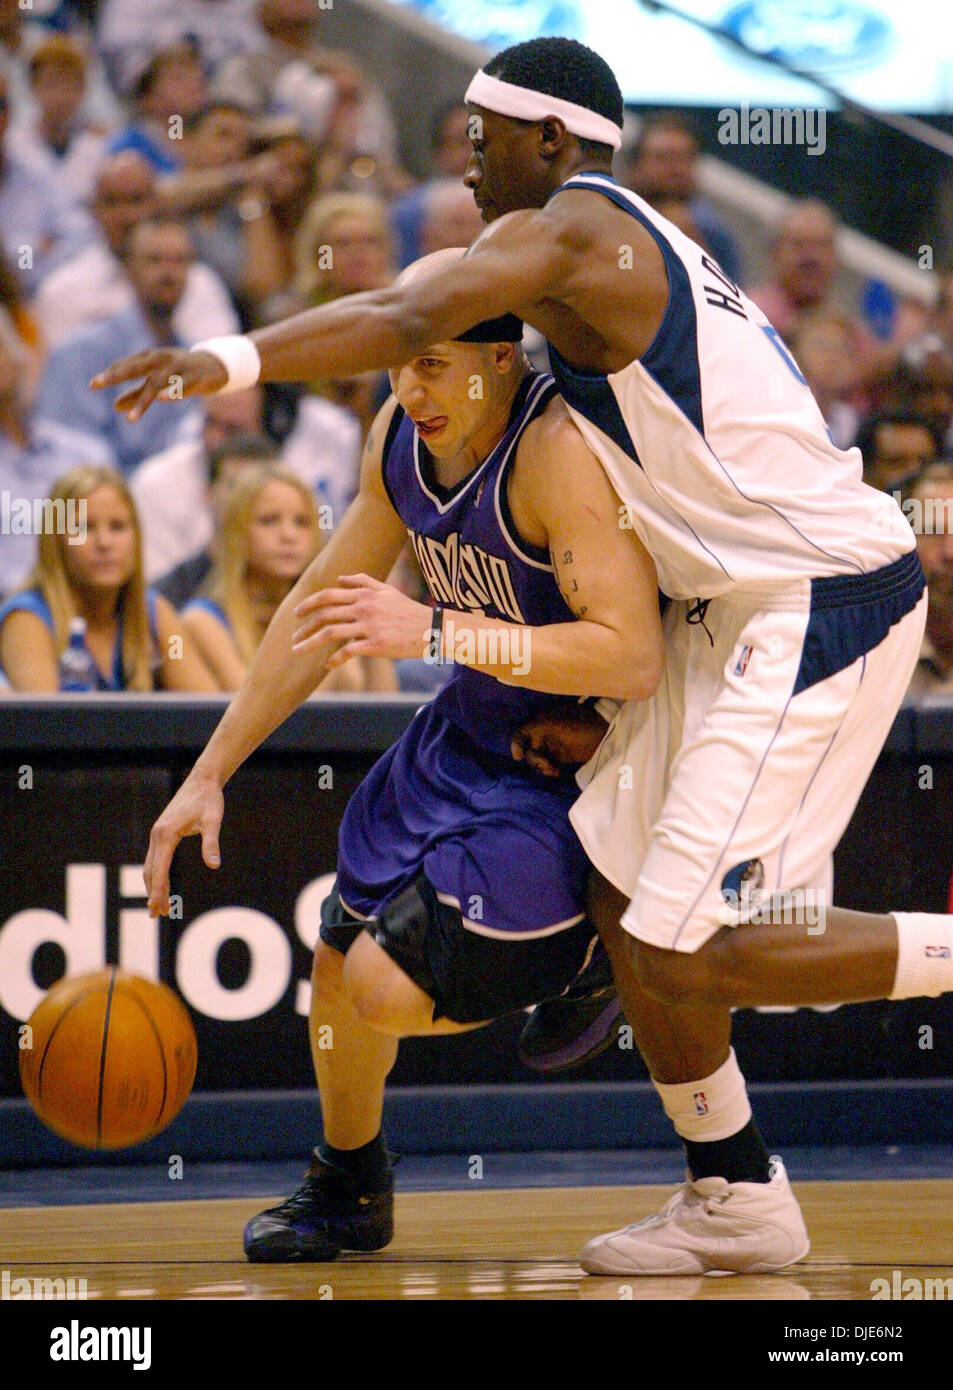 Apr 26, 2004; Dallas, TX, USA; MIKE BIBBY dribbles past a Mavericks player during the first round playoff game in Dallas. With this matchup of the league's two highest-scoring teams looking more and more like an slugfest, Stojakovic provided a rare burst of offense over the last five minutes of the third quarter. The Kings started it down by two and finished it up by five. They nev Stock Photo